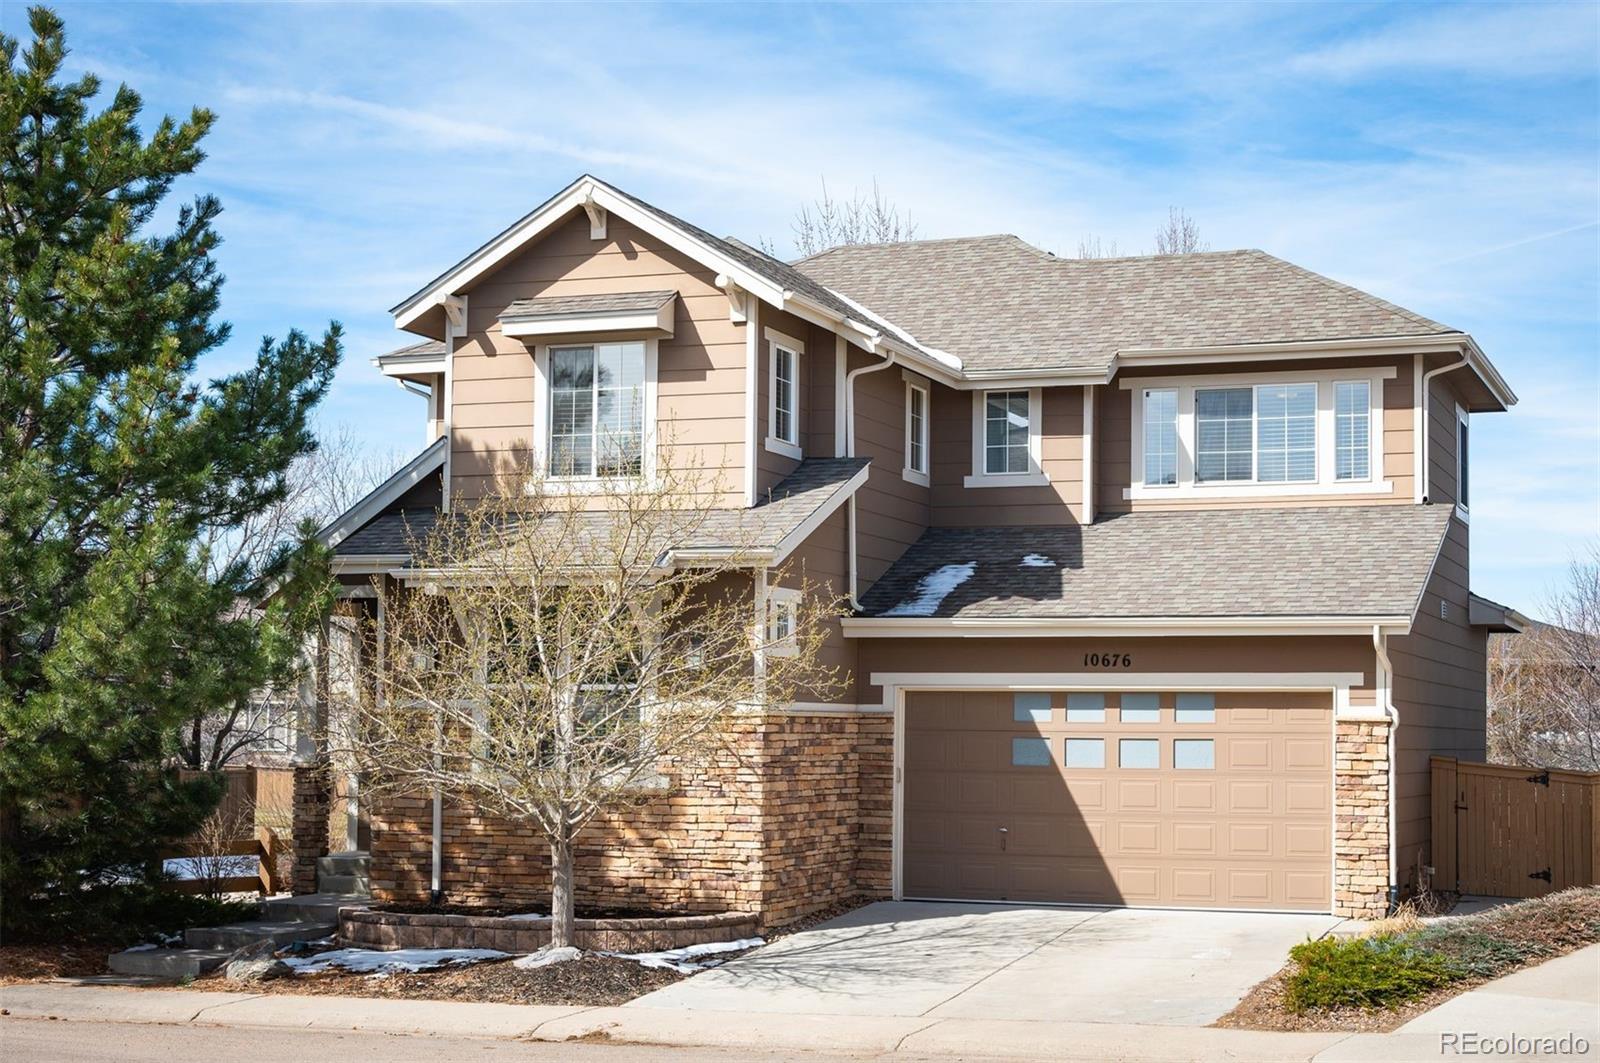 10676  riverbrook circle, highlands ranch sold home. Closed on 2024-05-02 for $700,000.